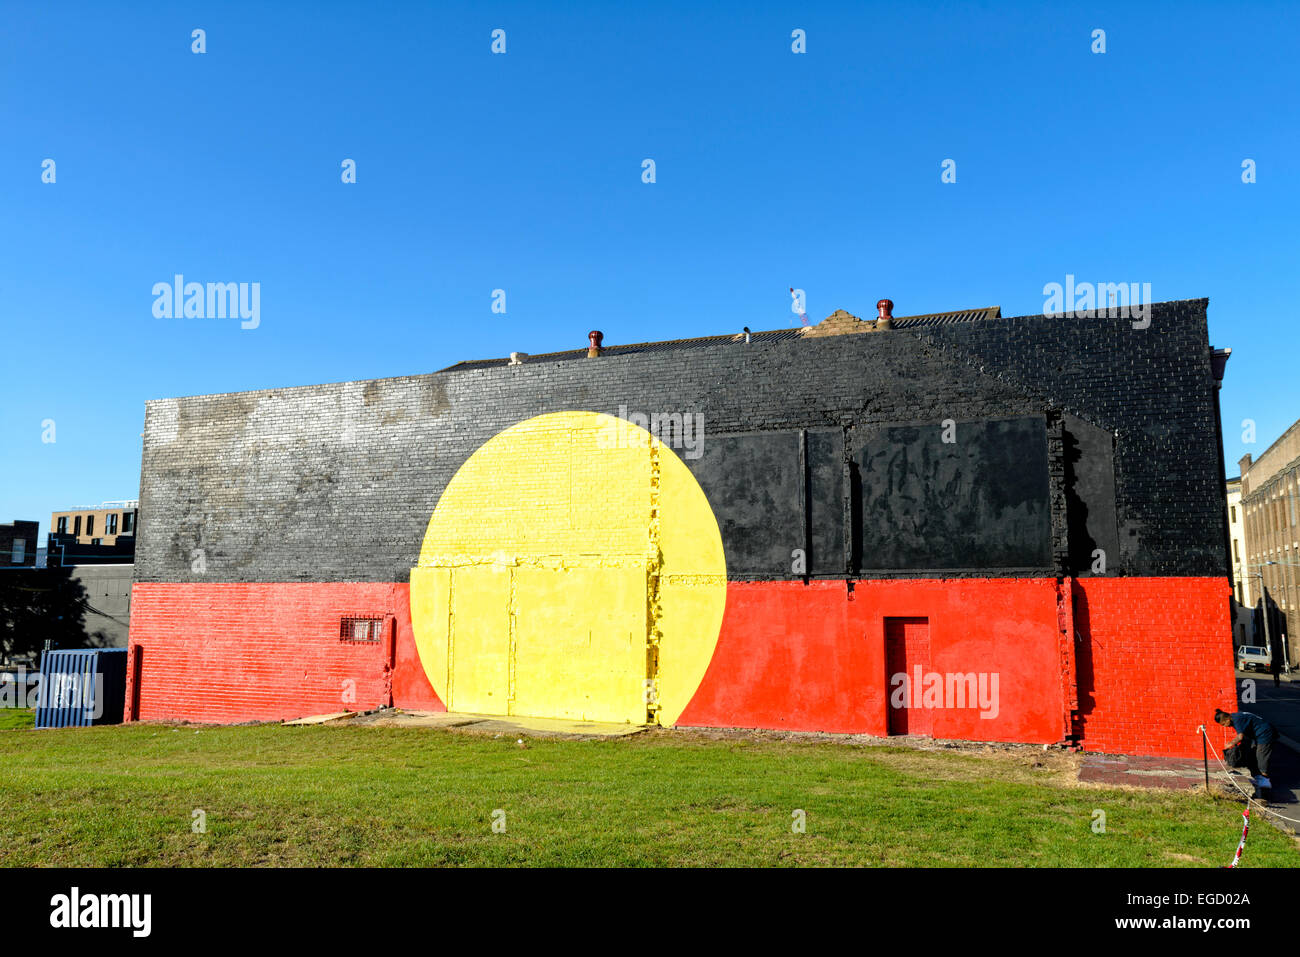 The famous Aborigine flag mural that marks 'The Block' in Redfern, Sydney, an area known for its community of Aboriginal people. Aboriginal flag city Stock Photo